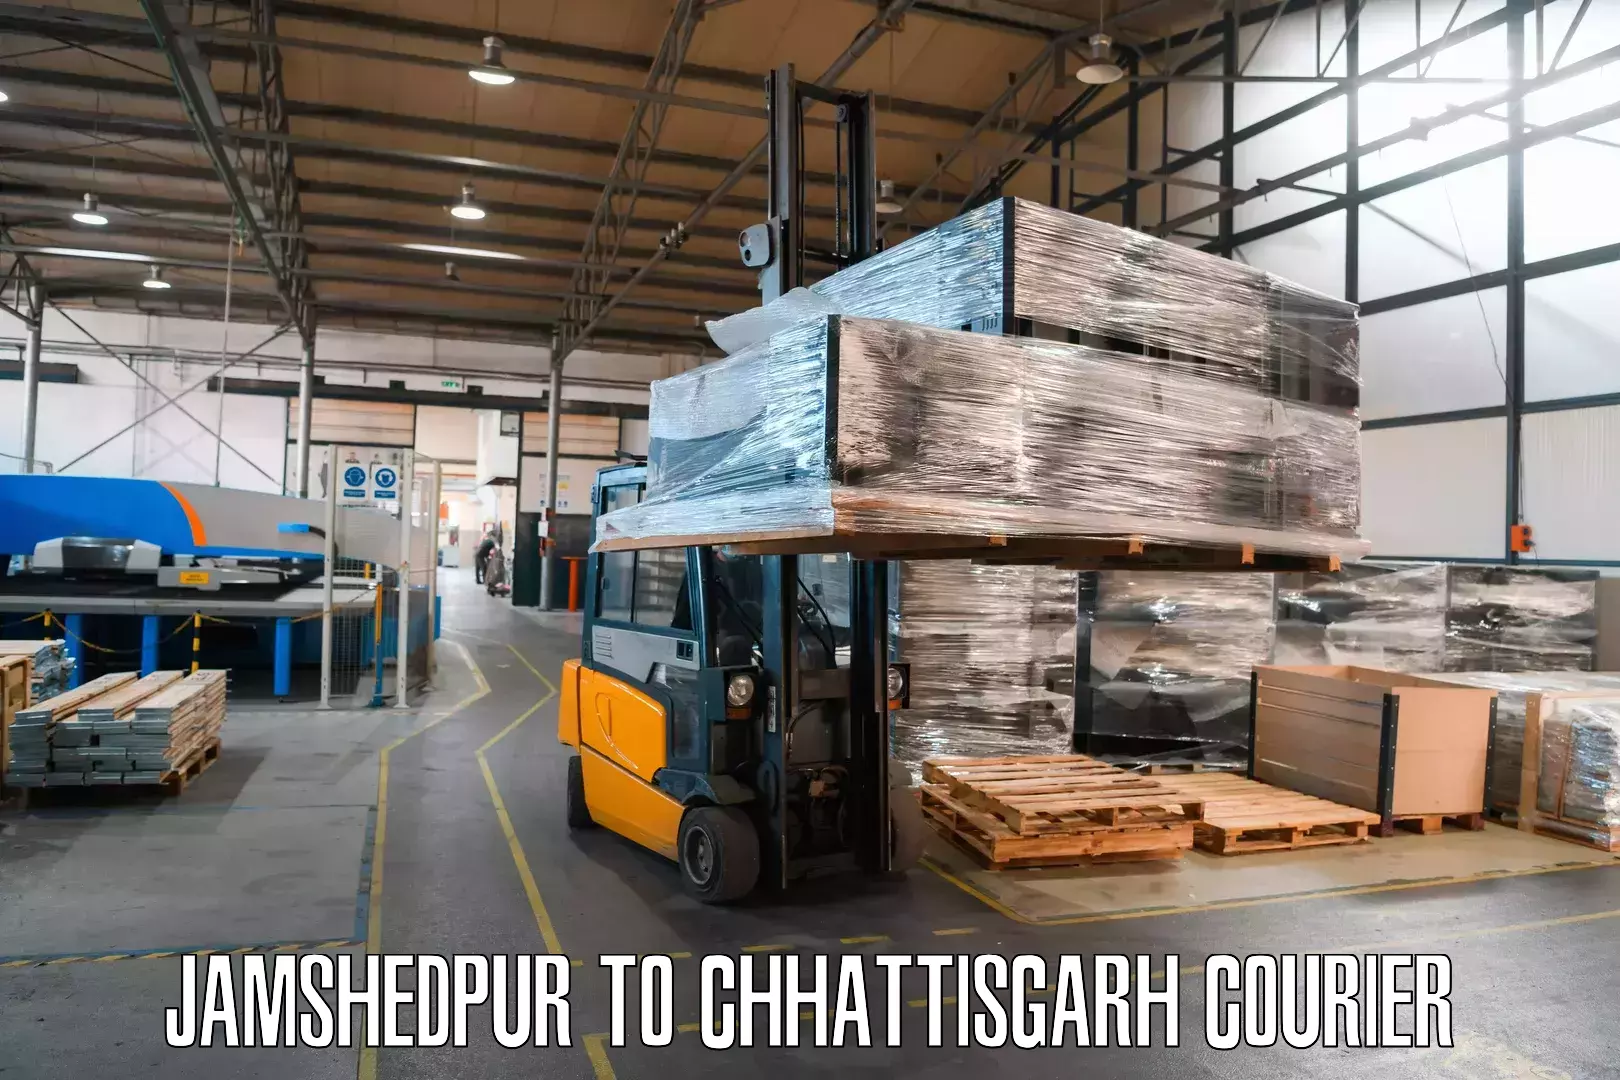 Pharmaceutical courier Jamshedpur to bagbahra